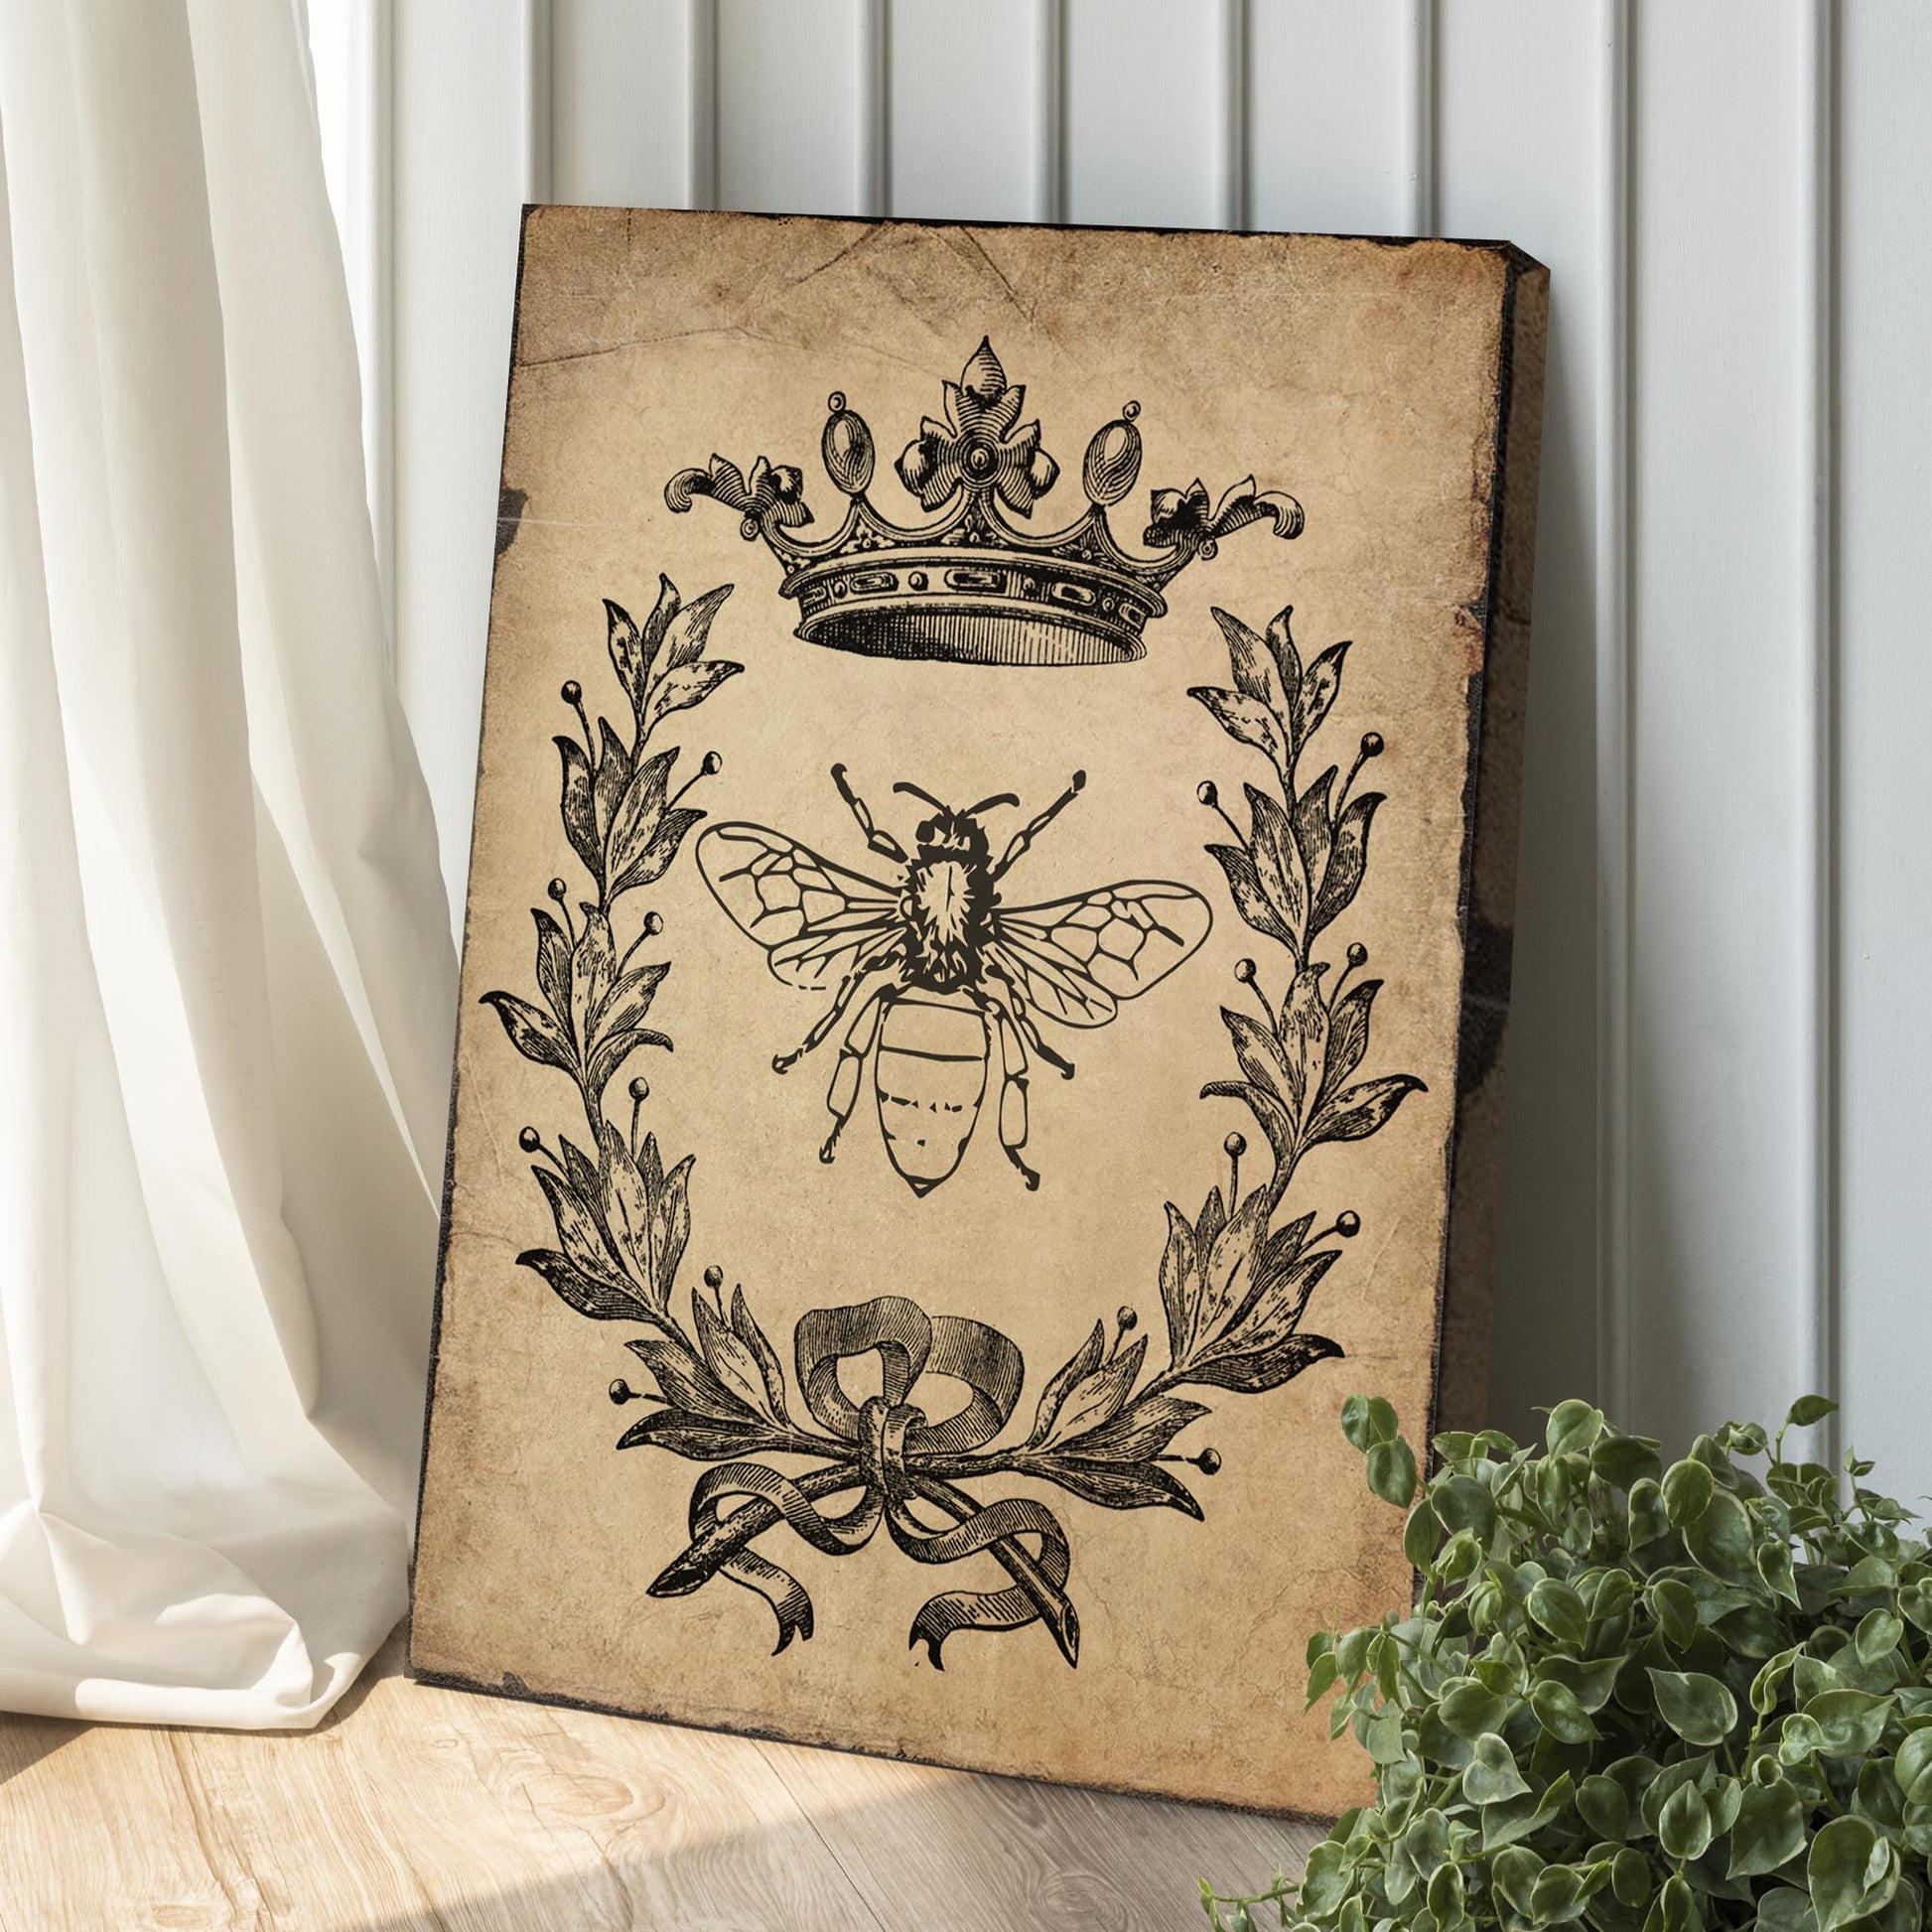 Queen Bee Vintage Painting Canvas Wall Art Style 1 - Image by Tailored Canvases